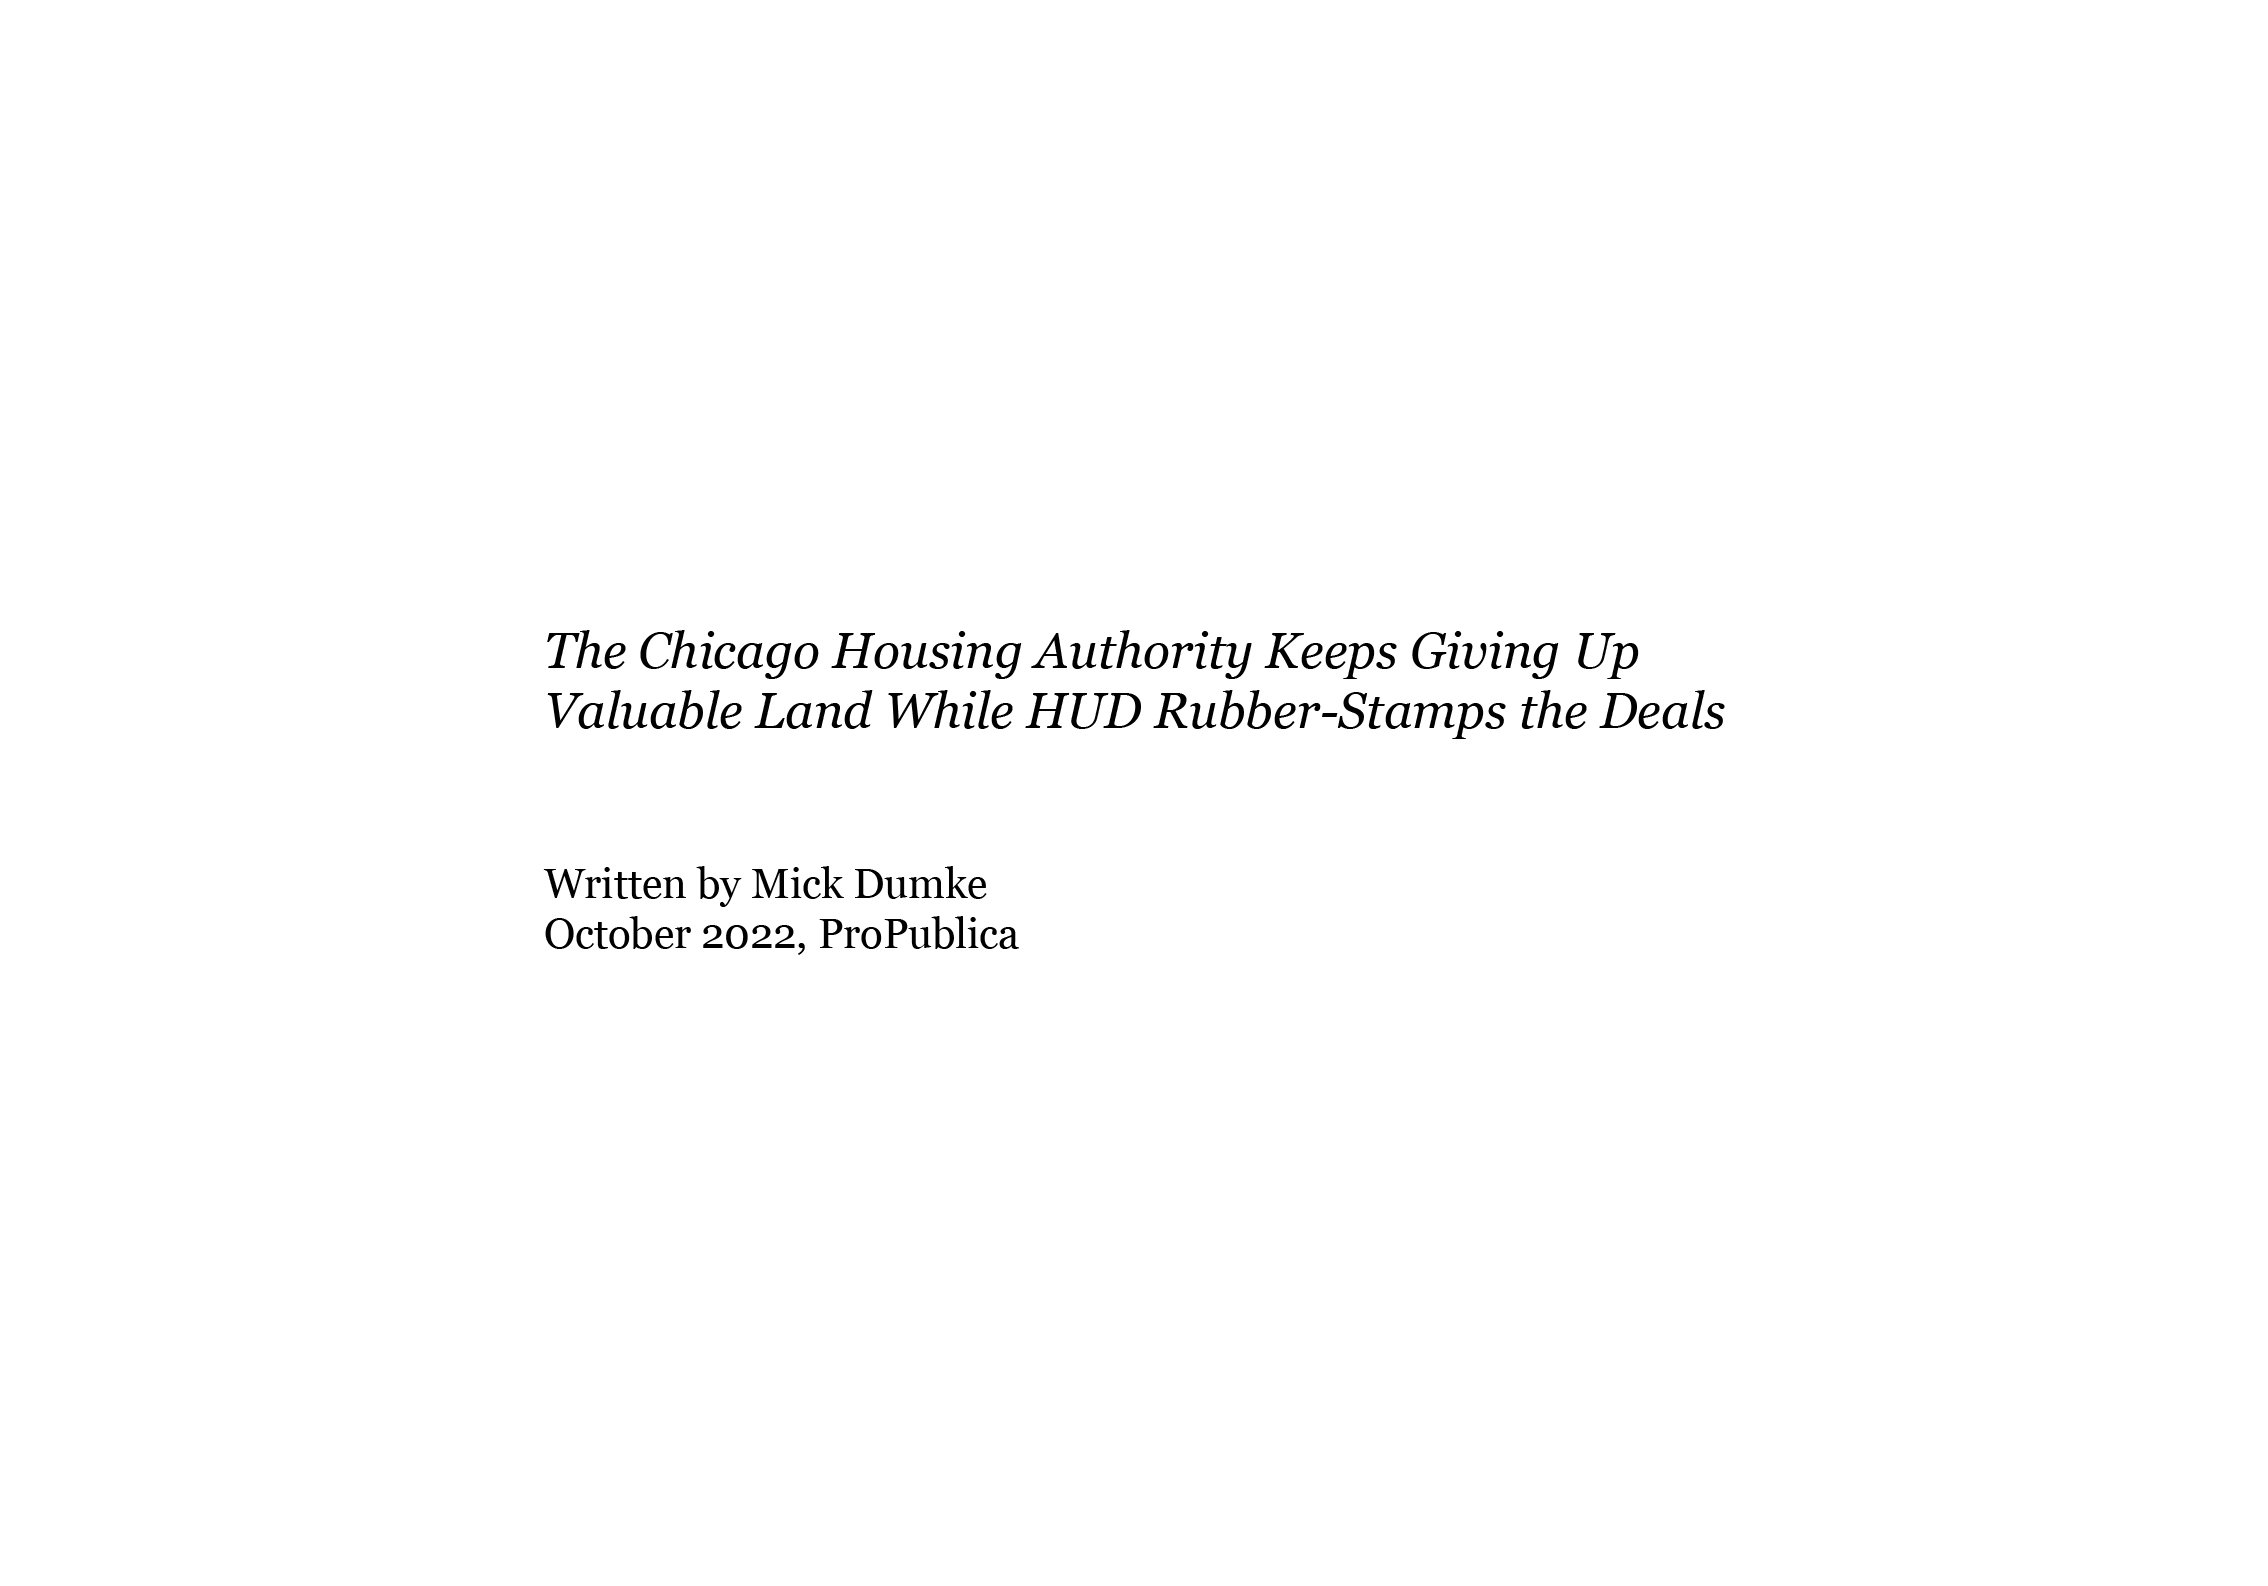  Chicago Housing Authority and HUD  ProPublica, 2022  